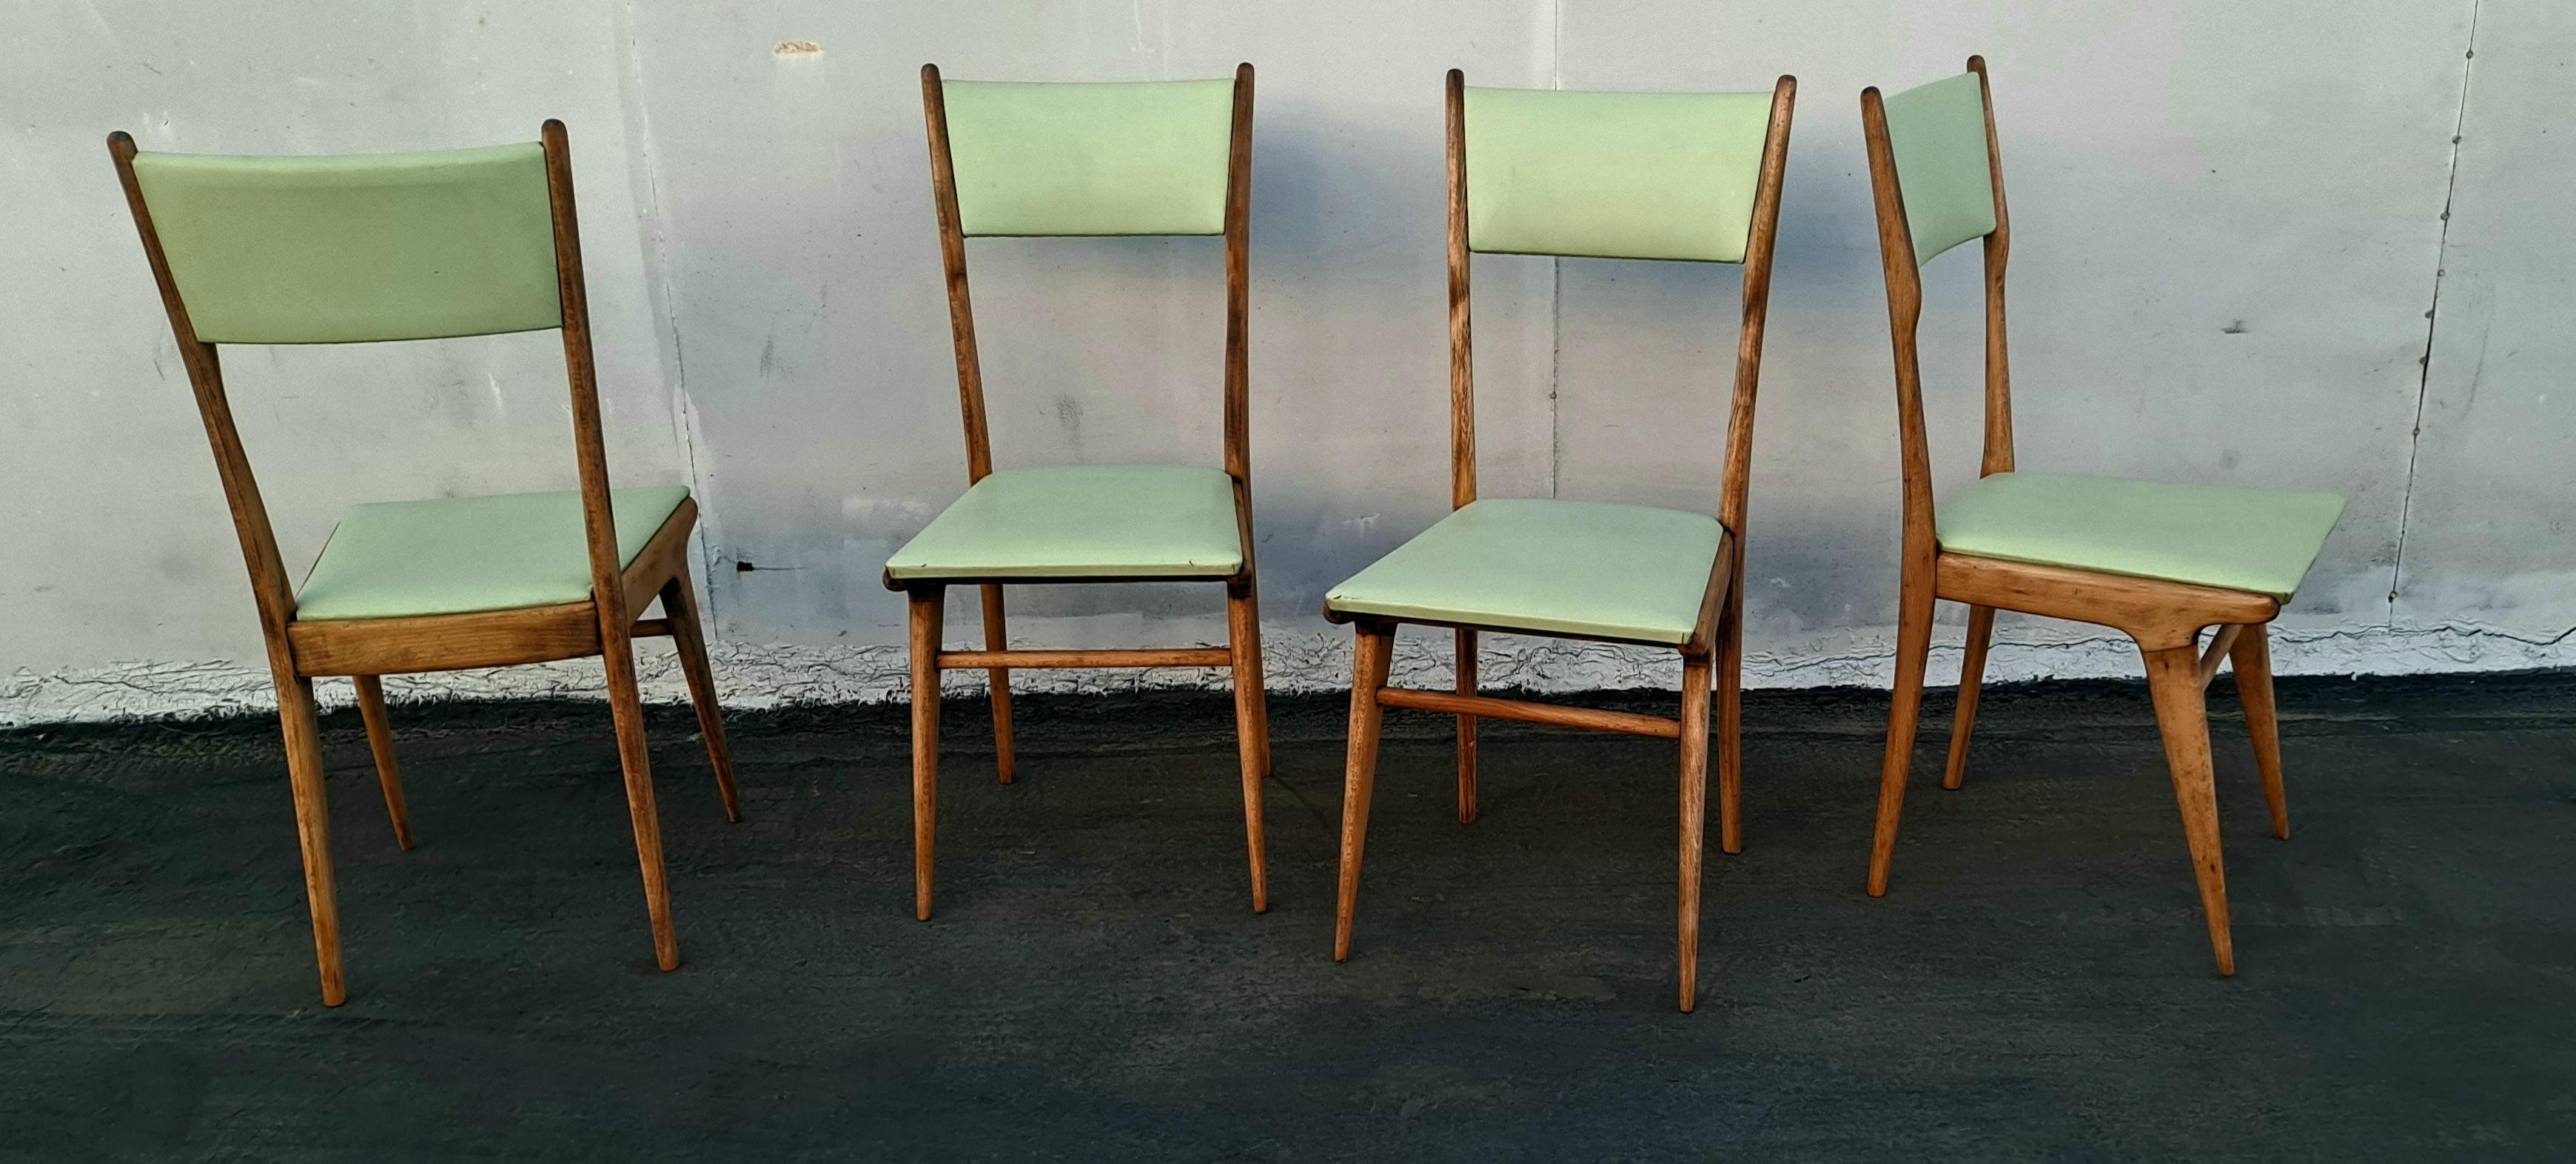 Italian Midcentury Ding Room Chairs For Sale 1